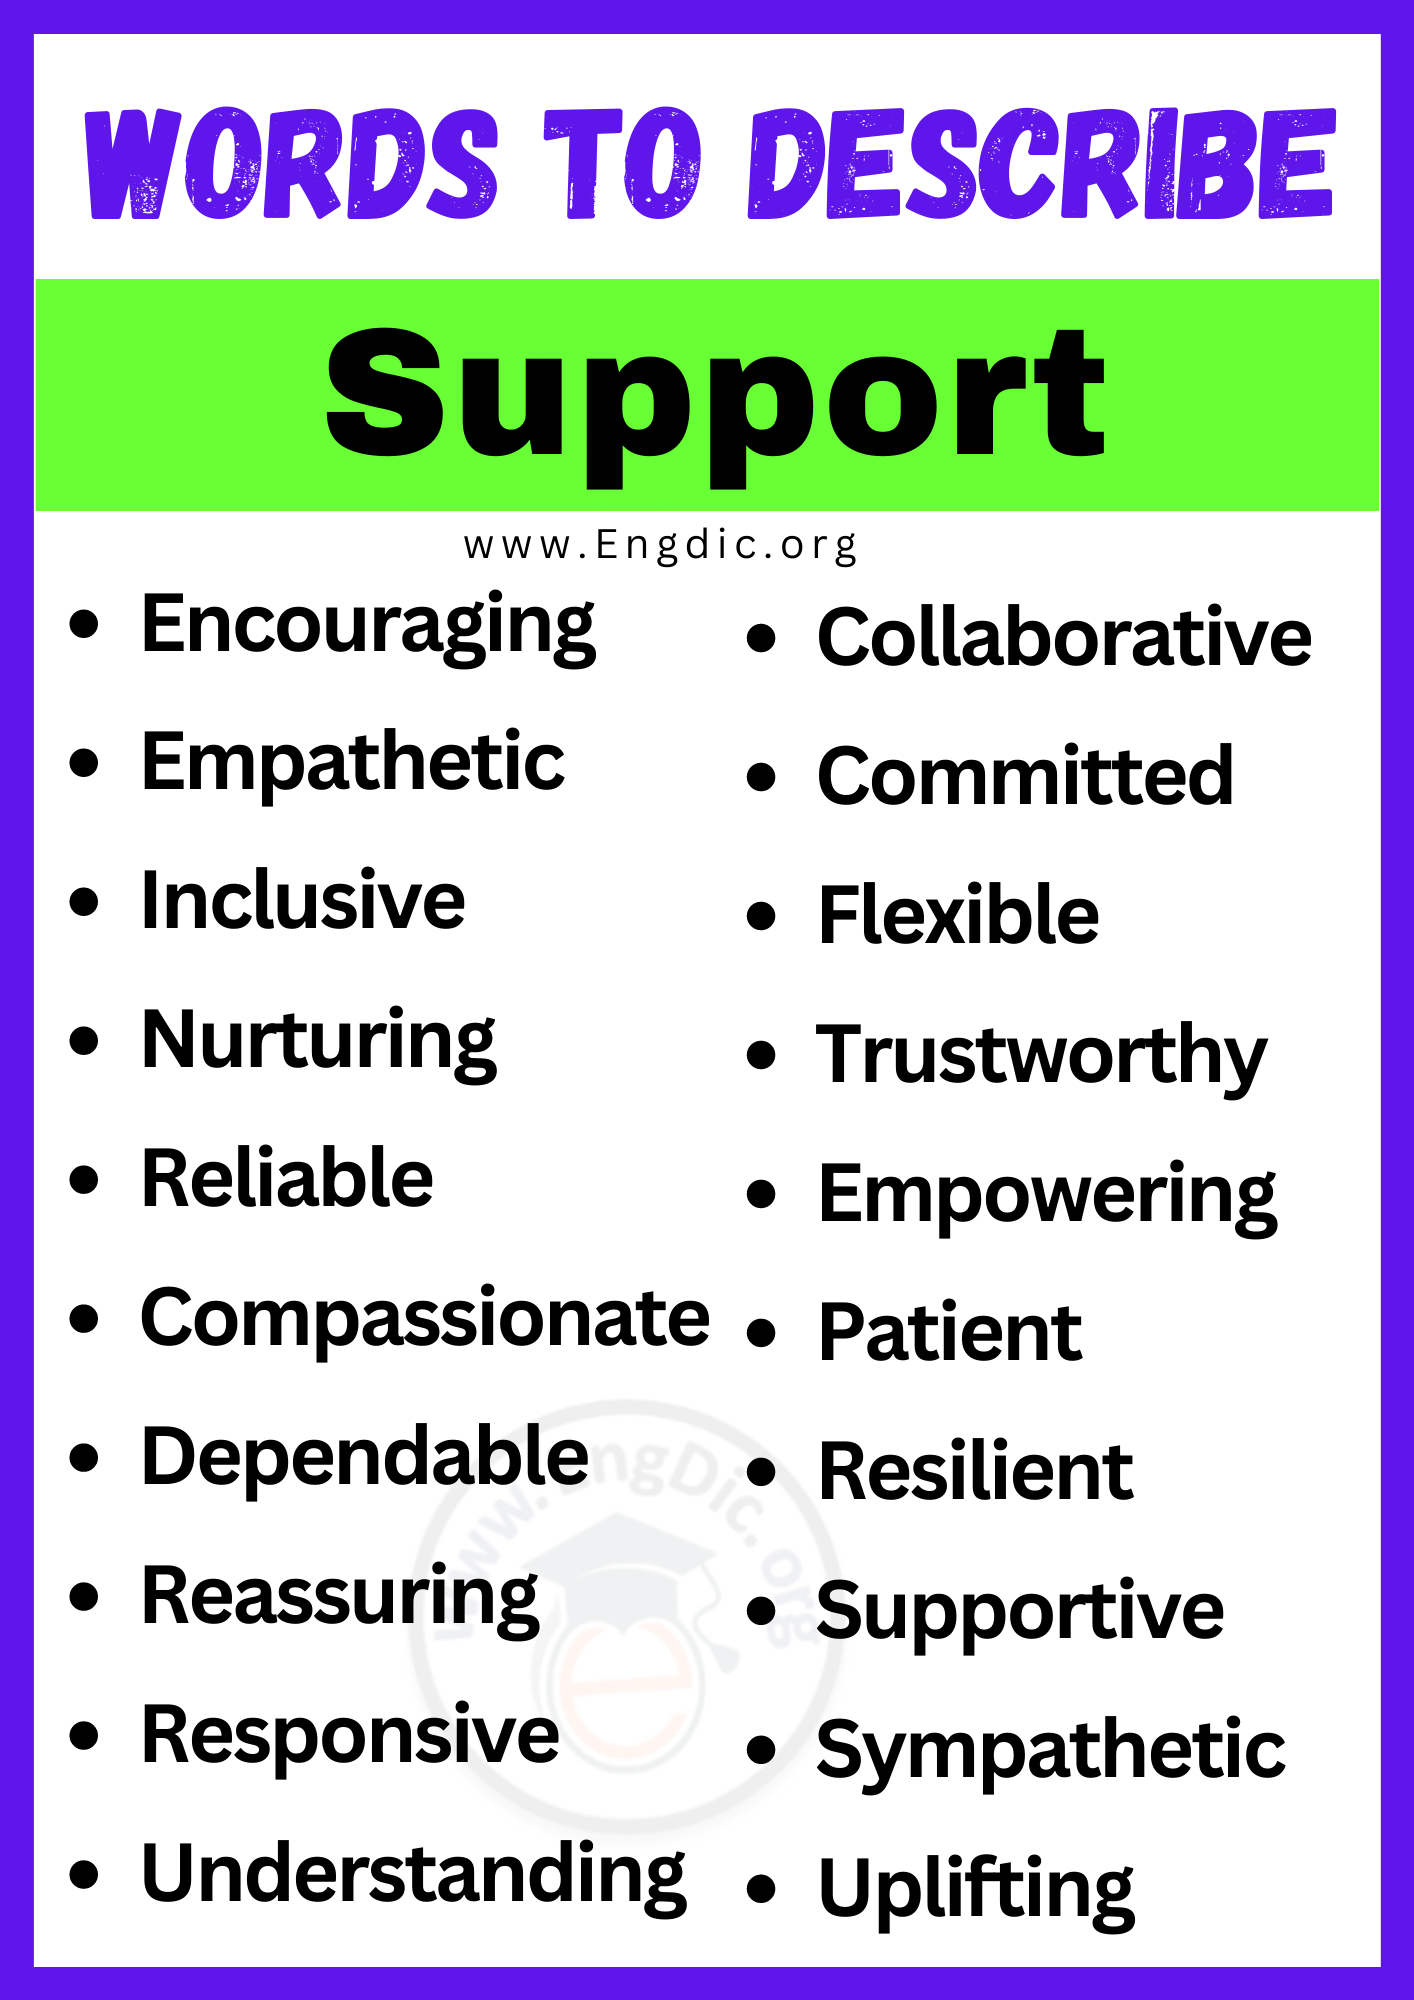 Words to Describe Support